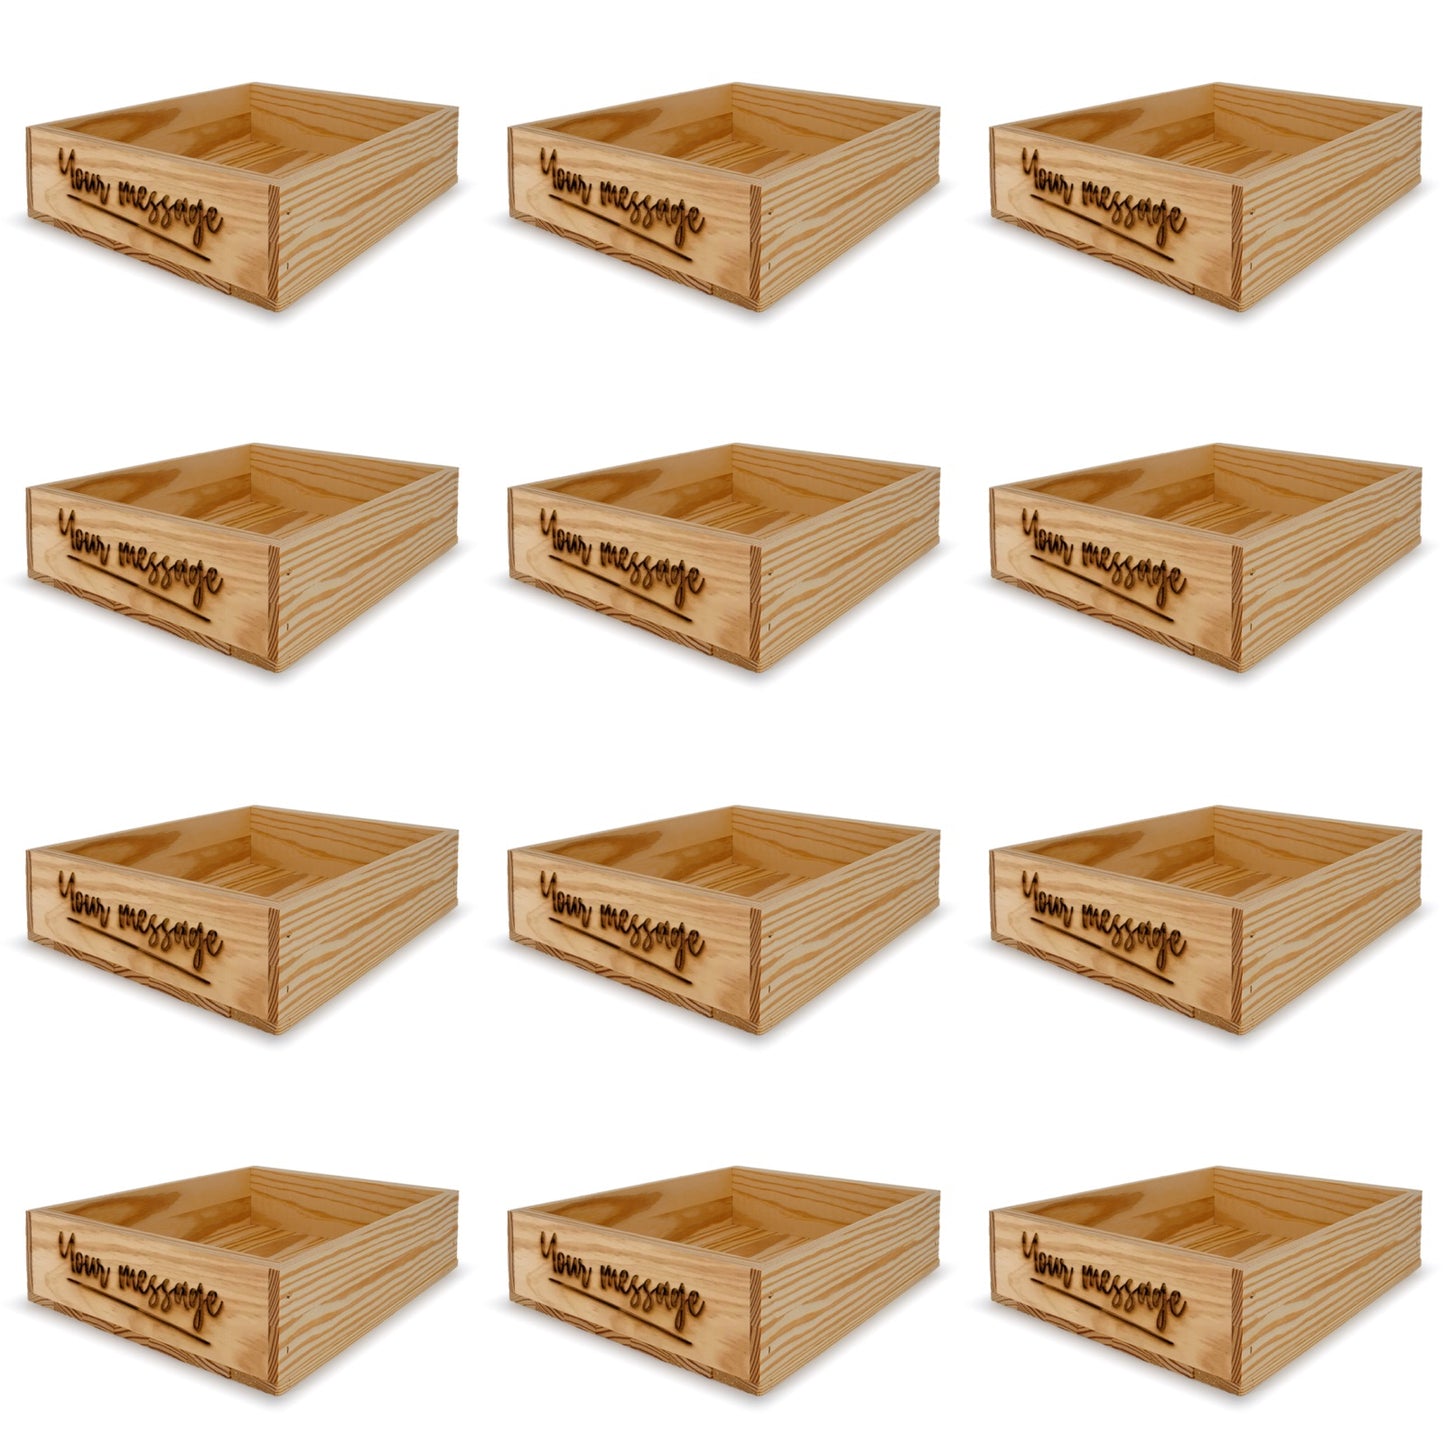 12 Small wooden crates with custom message 14x11.5x3.5